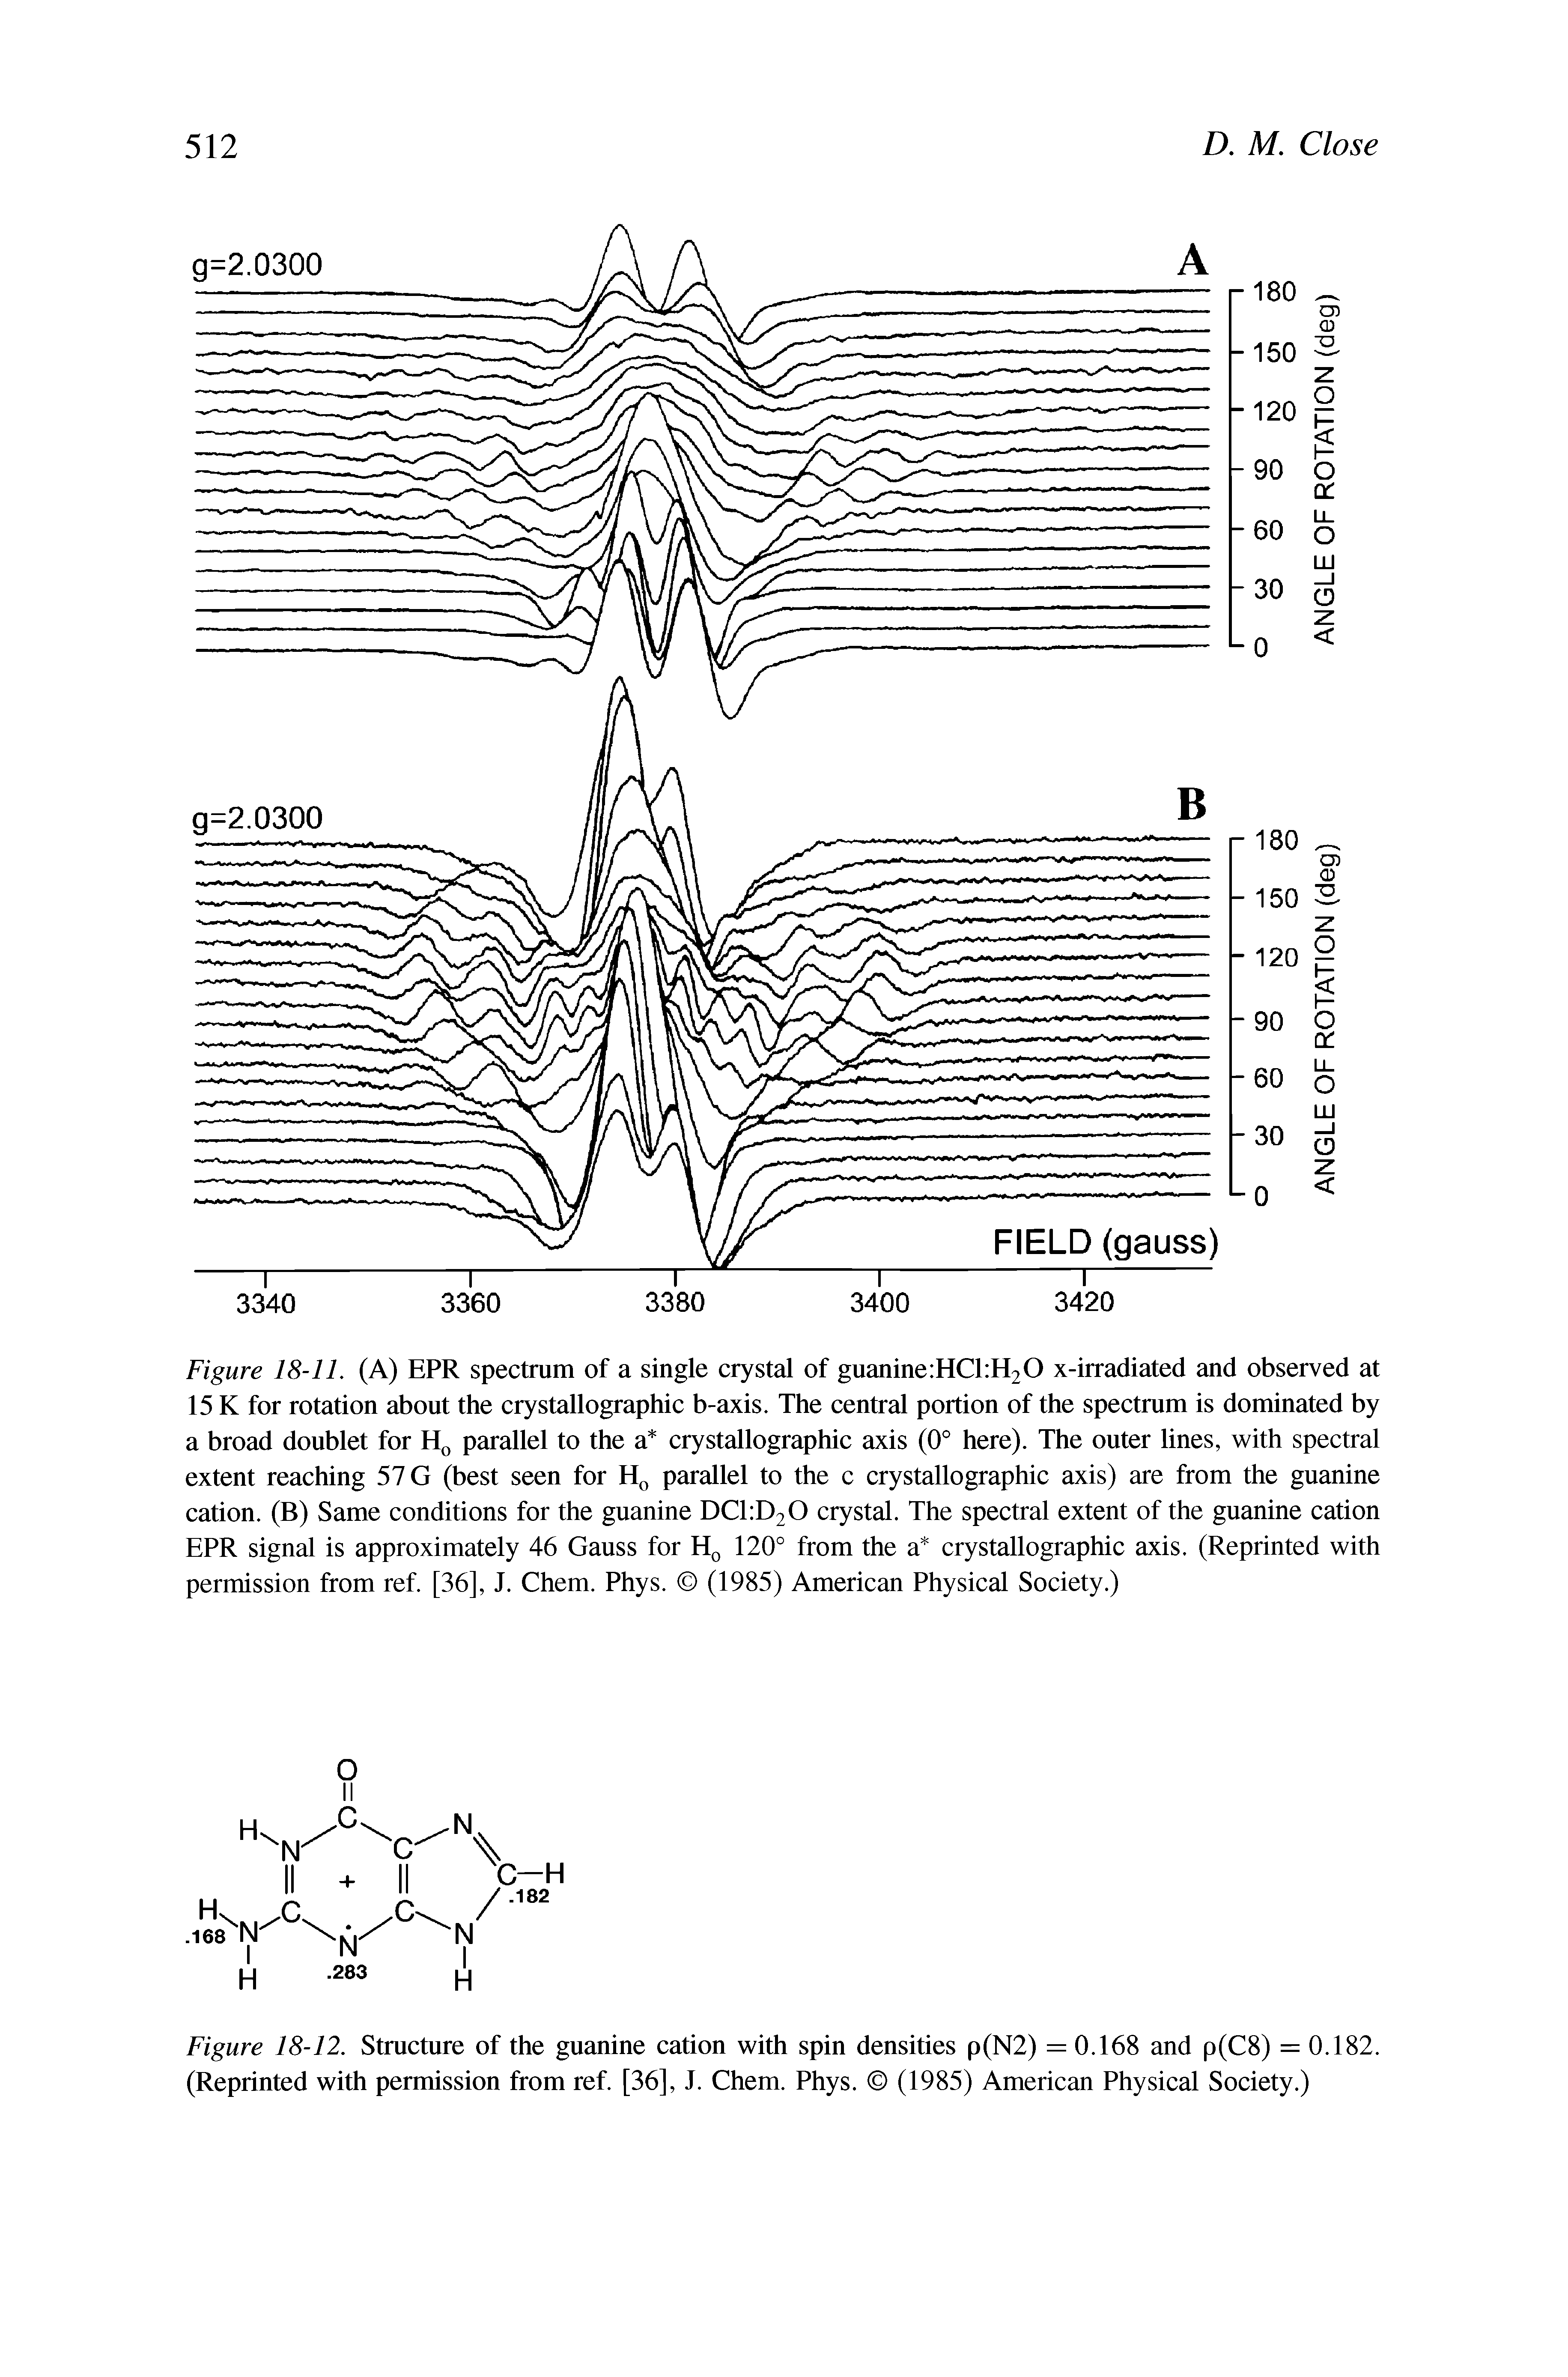 Figure 18-12. Structure of the guanine cation with spin densities p(N2) = 0.168 and p(C8) = 0.182. (Reprinted with permission from ref. [36], J. Chem. Phys. (1985) American Physical Society.)...